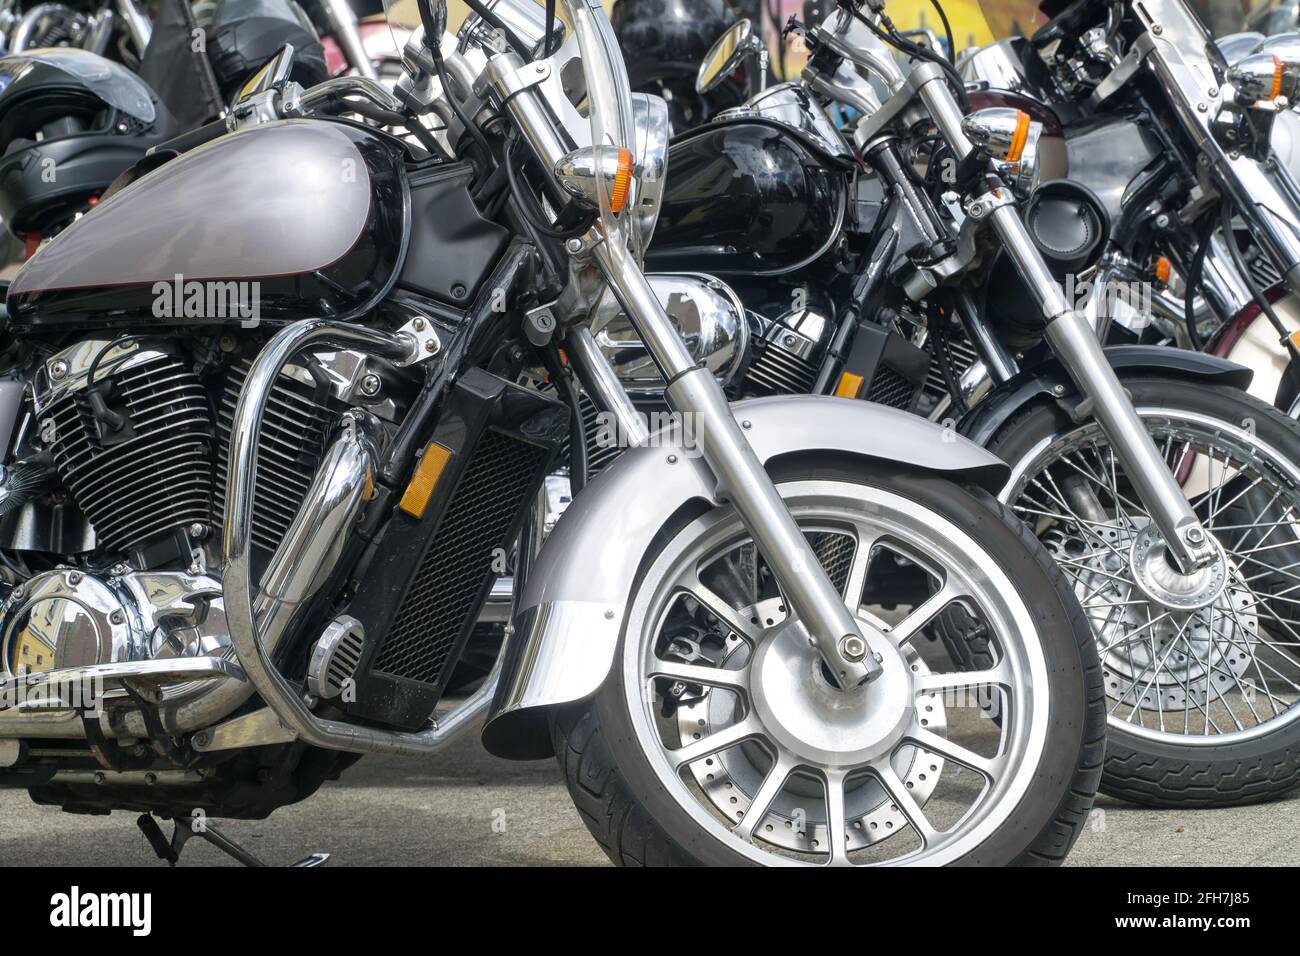 Motorcycles parked on the motorcycles parking lot. Closeup of motorcycles front wheel. Stock Photo